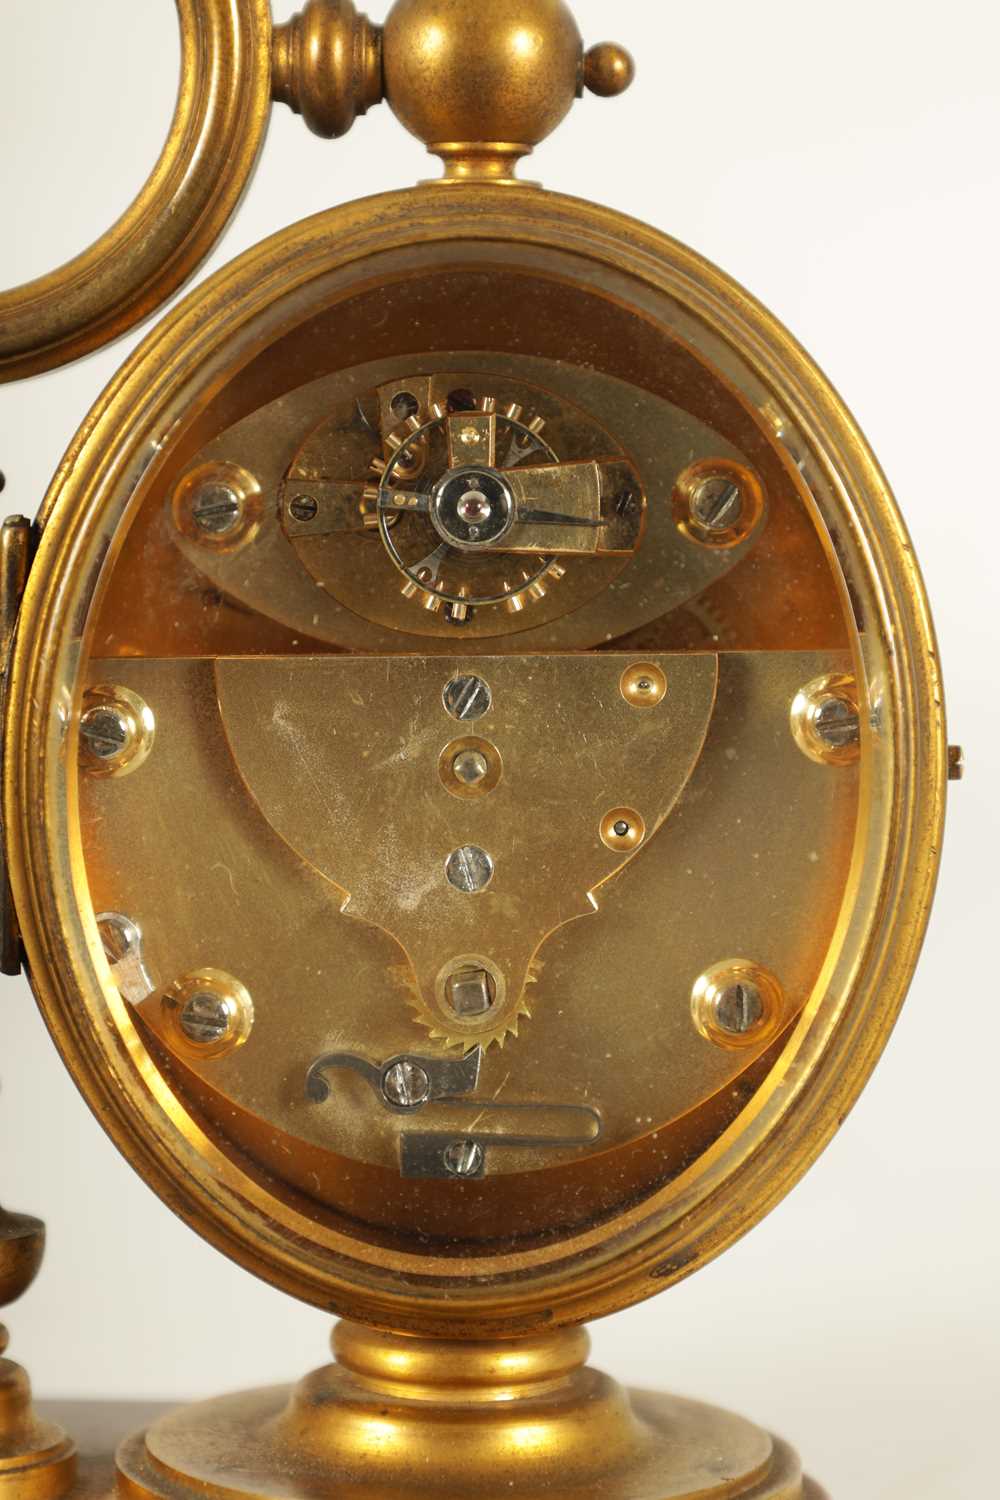 A LATE 19TH CENTURY FRENCH ORMOLU AND ROUGE MARBLE DESK COMPENDIUM CARRIAGE CLOCK - Image 5 of 8